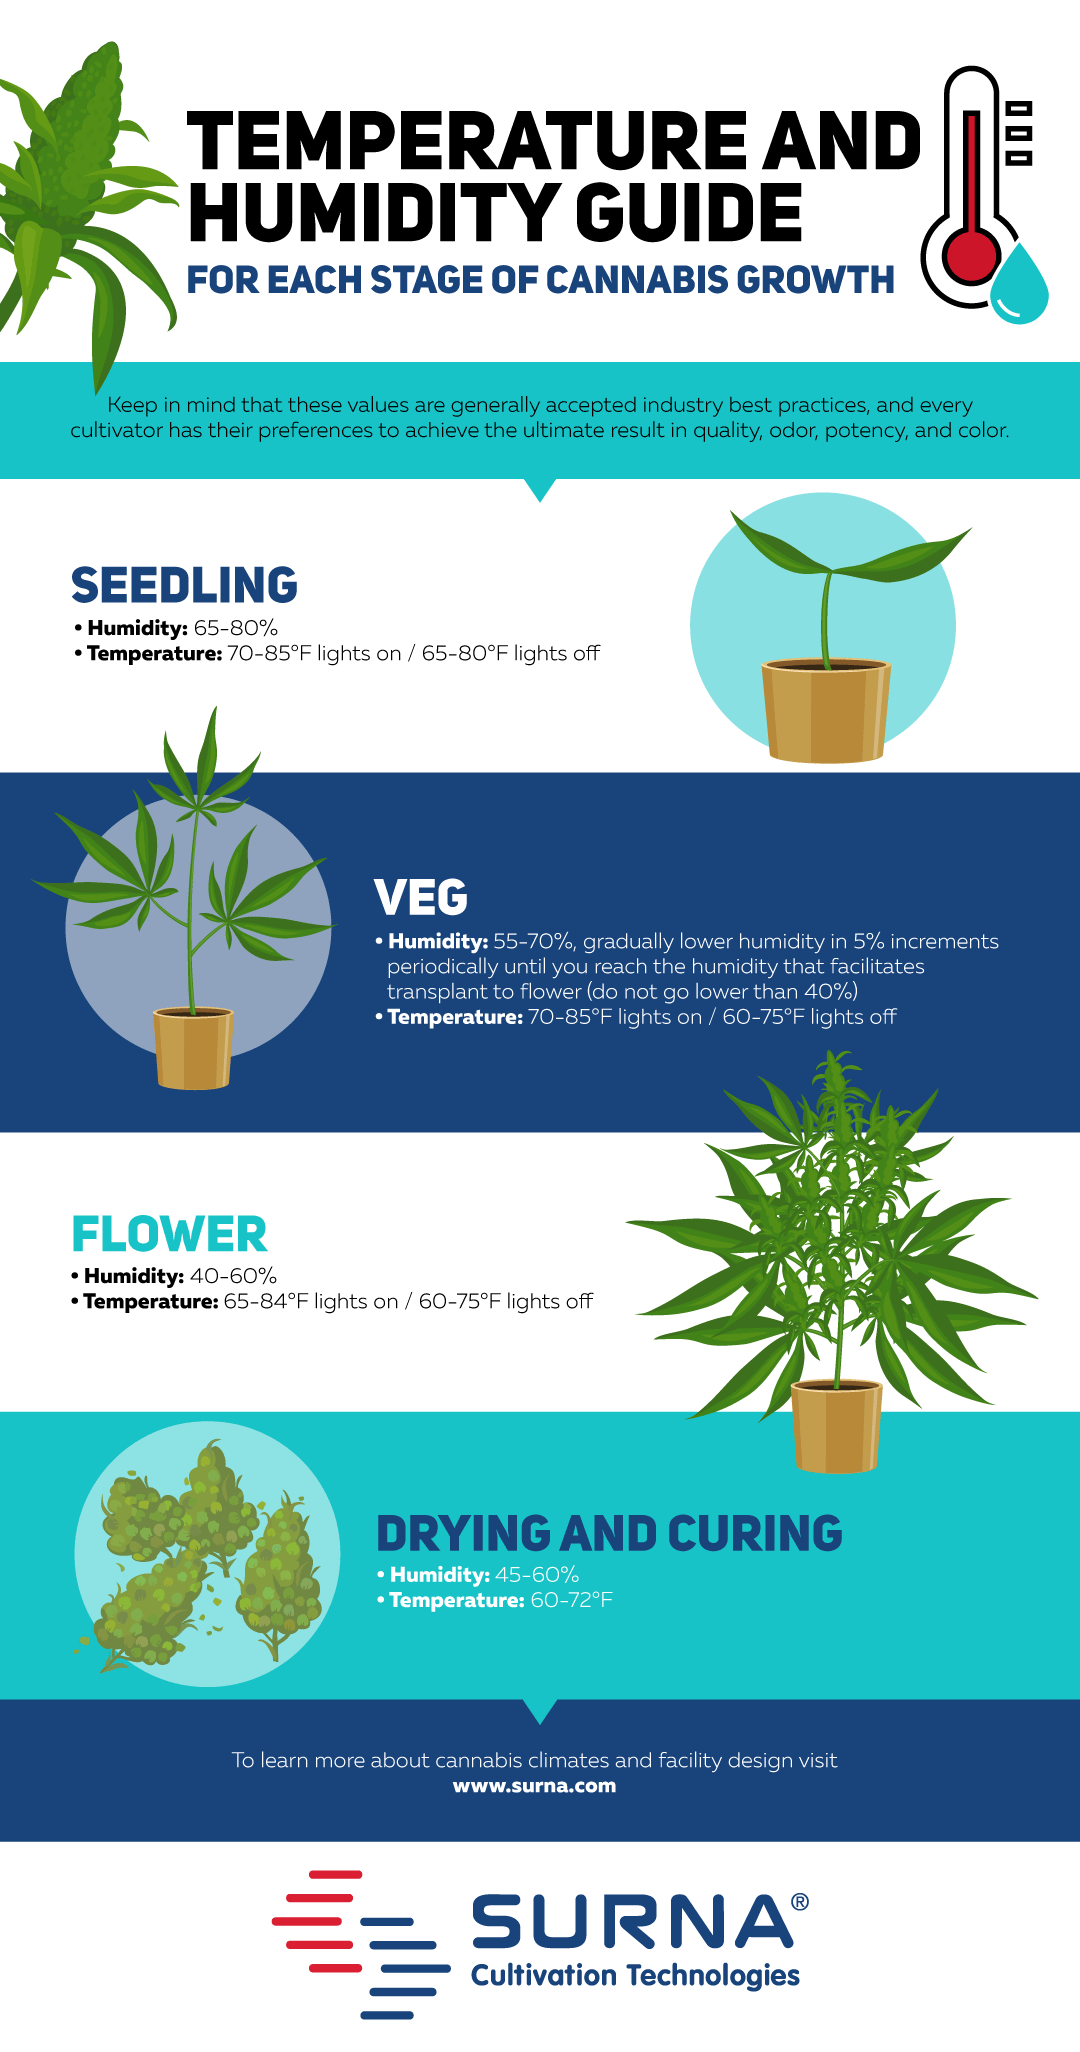 temperature and humidity guide for each stage of cannabis growth infographic resource for growers